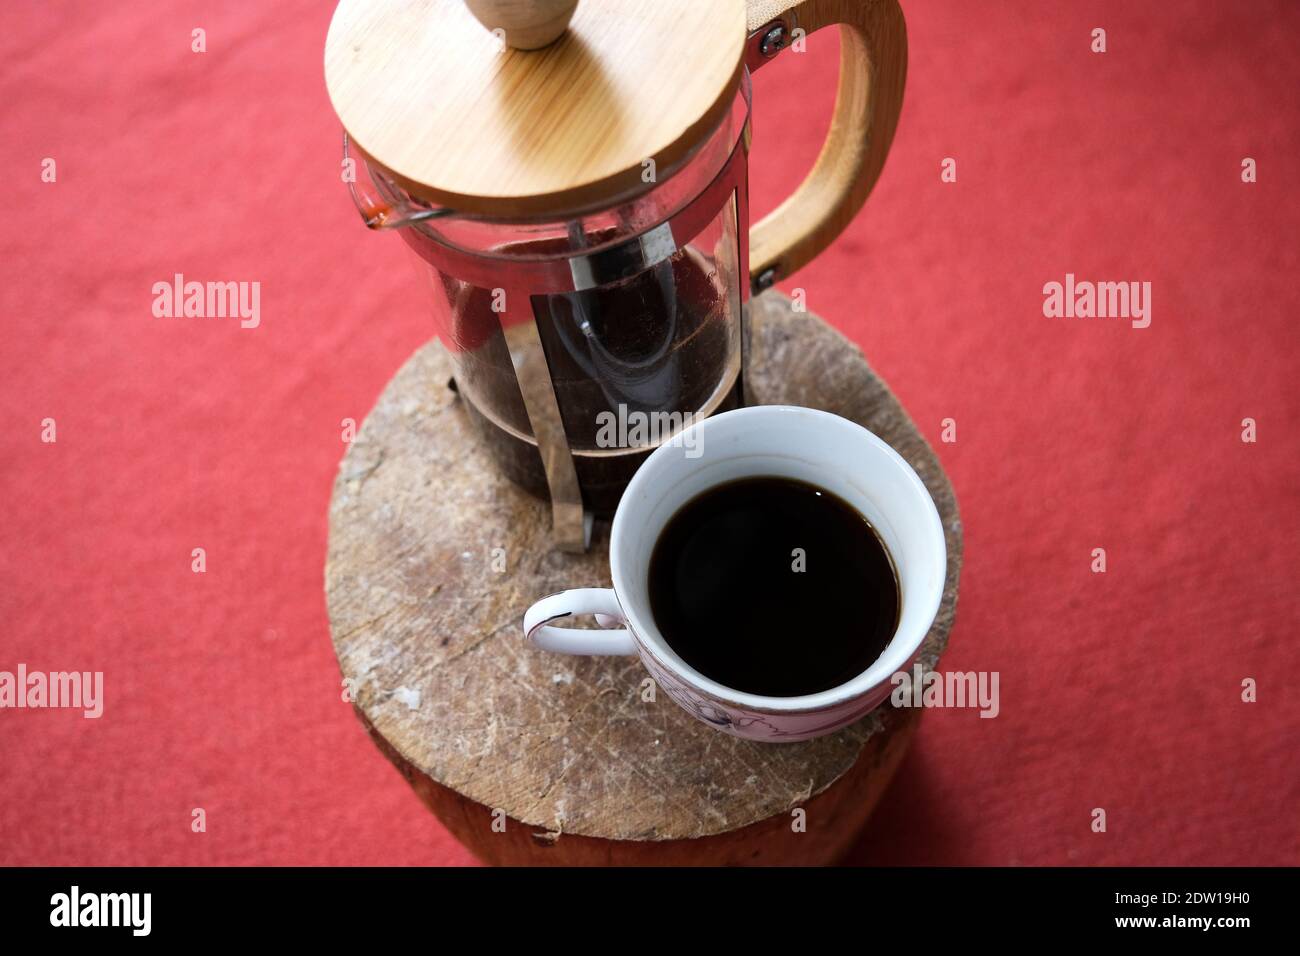 A pot of coffee and french press on the cut wooden with red carpet background. Stock Photo